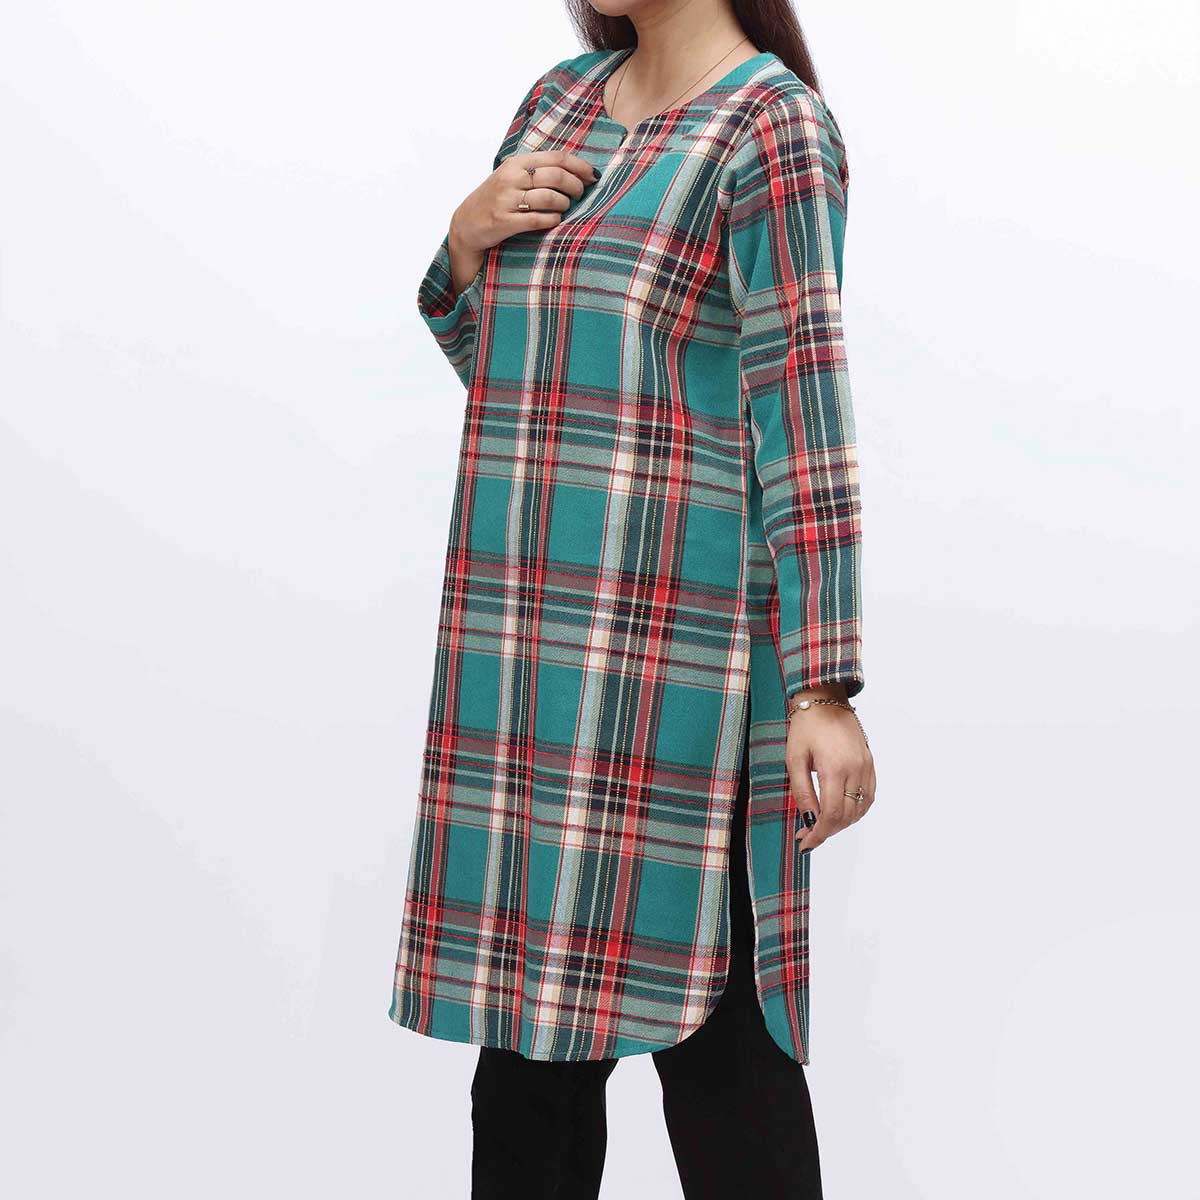 1PC- Flannel Checkered Shirt PW3291